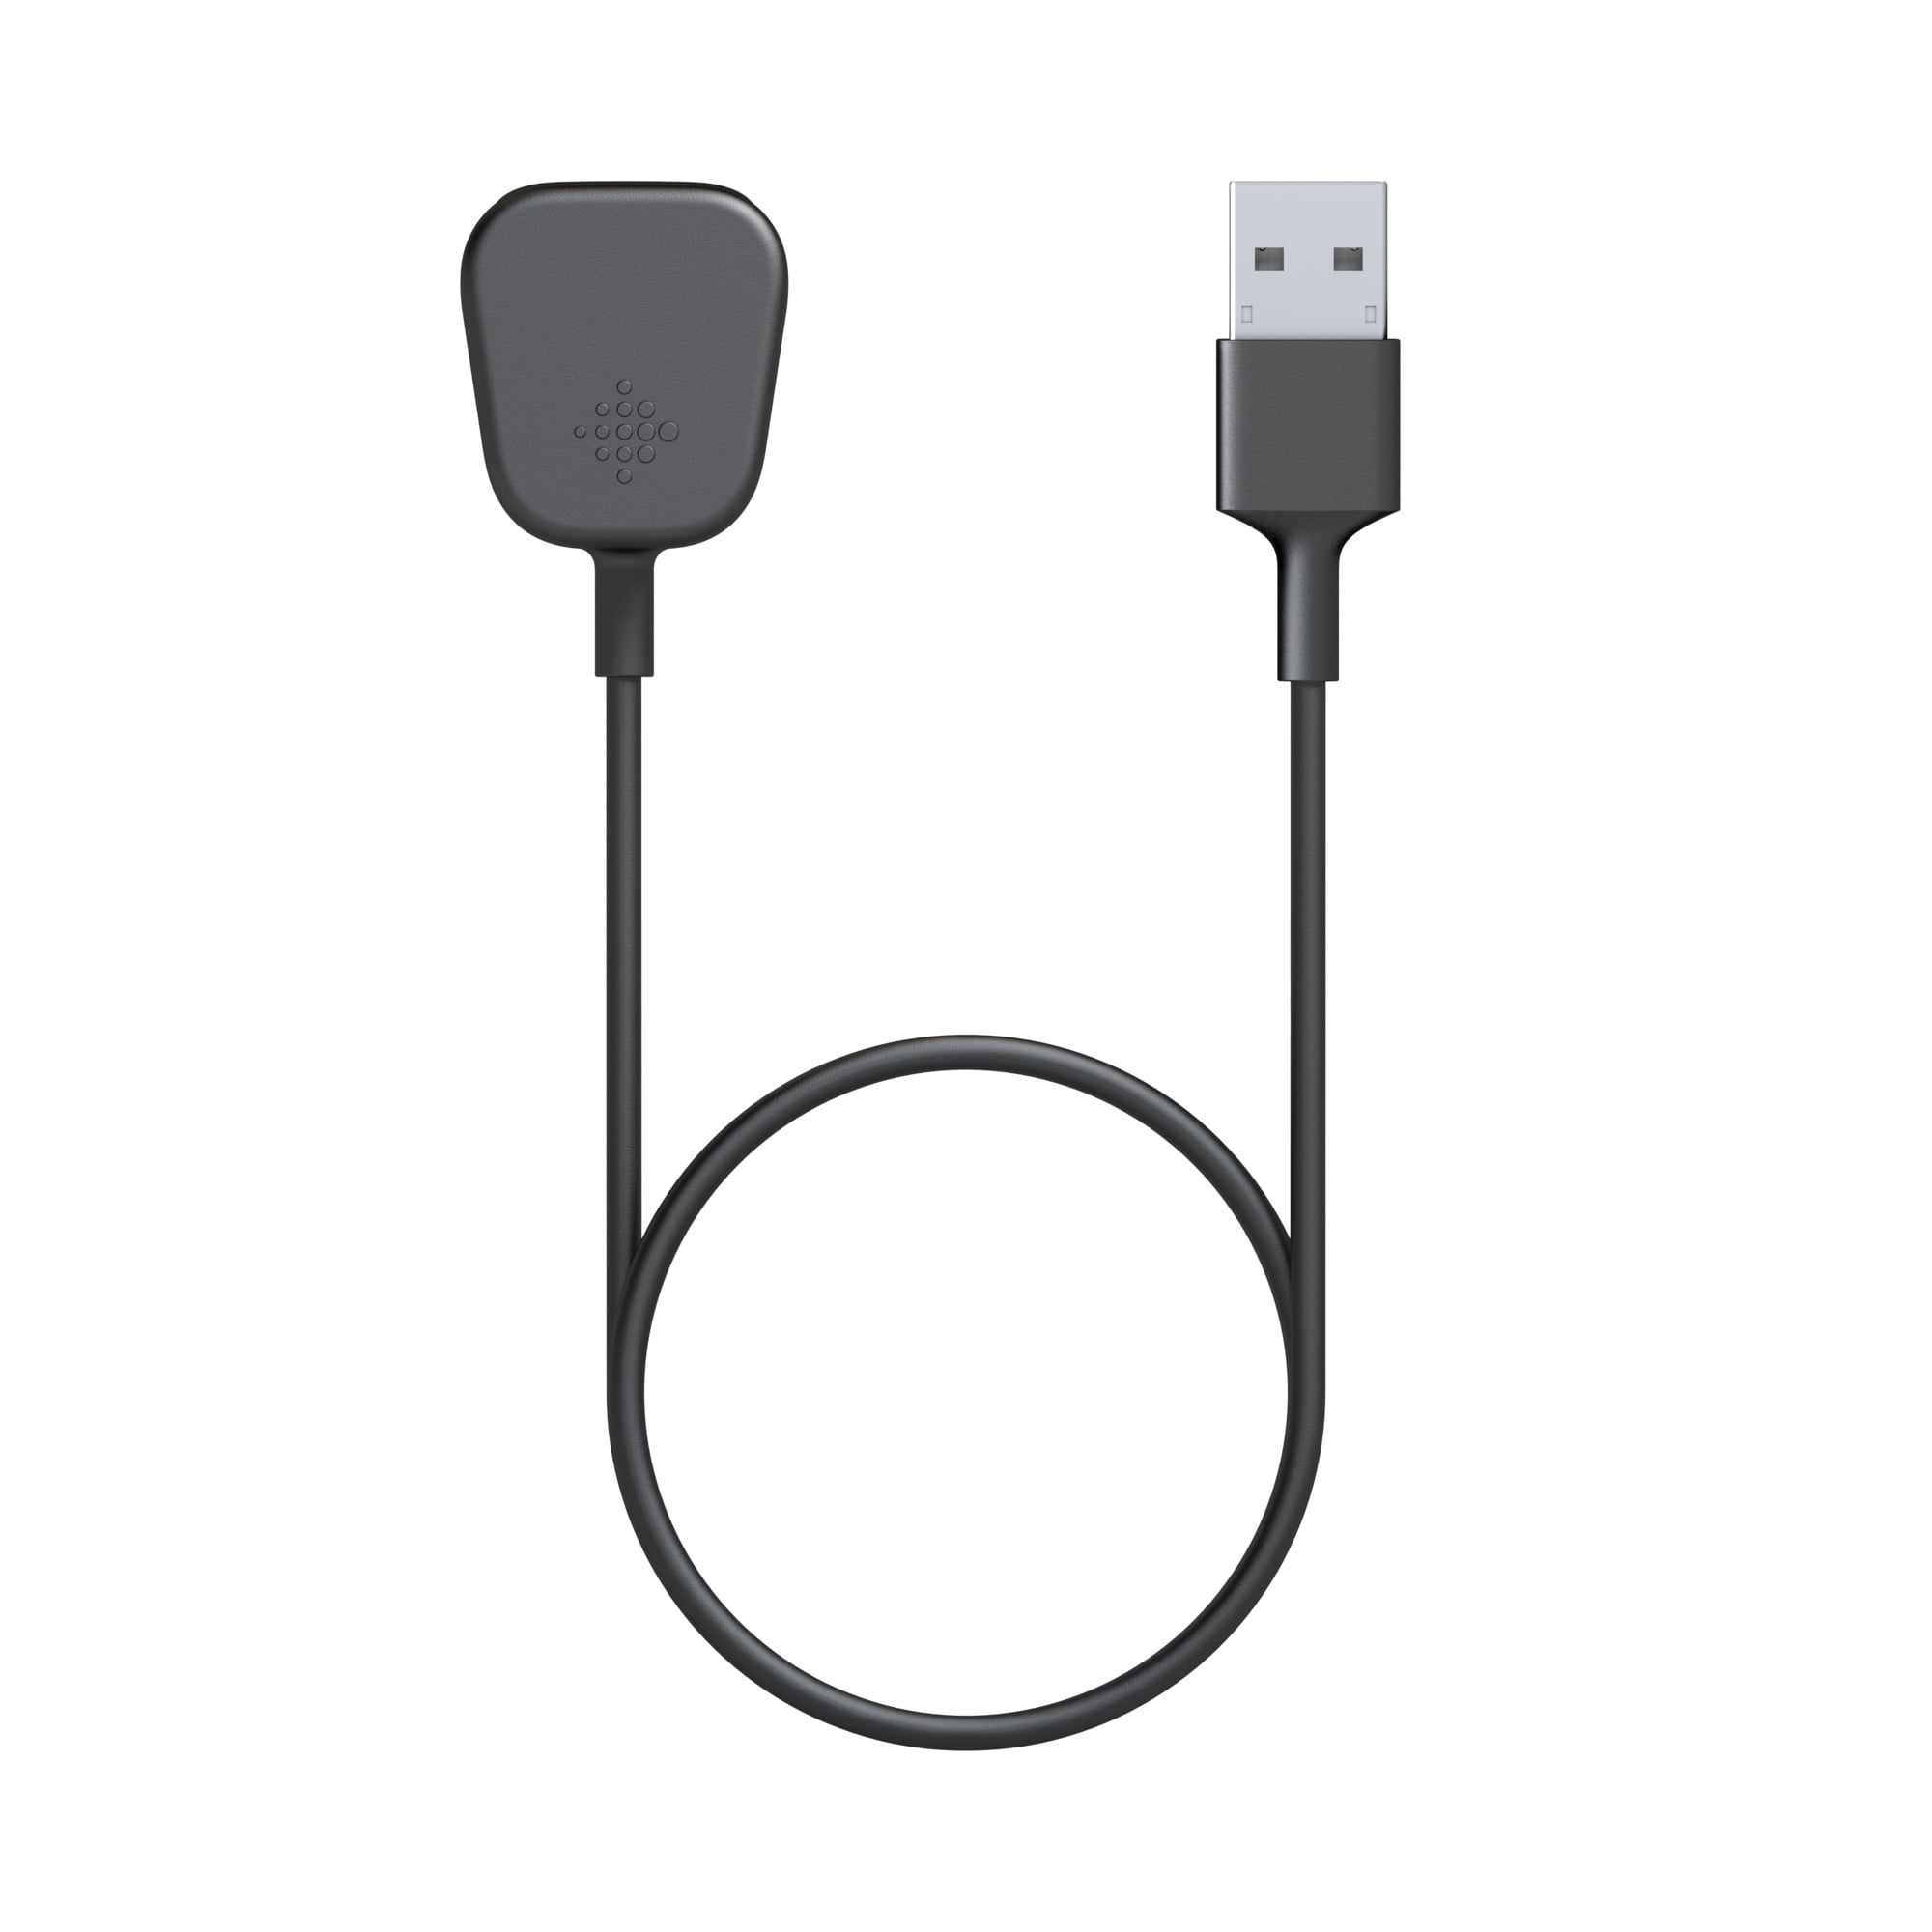 1 piece USB Cable Charger for Fitbit ONE actvity tracker 